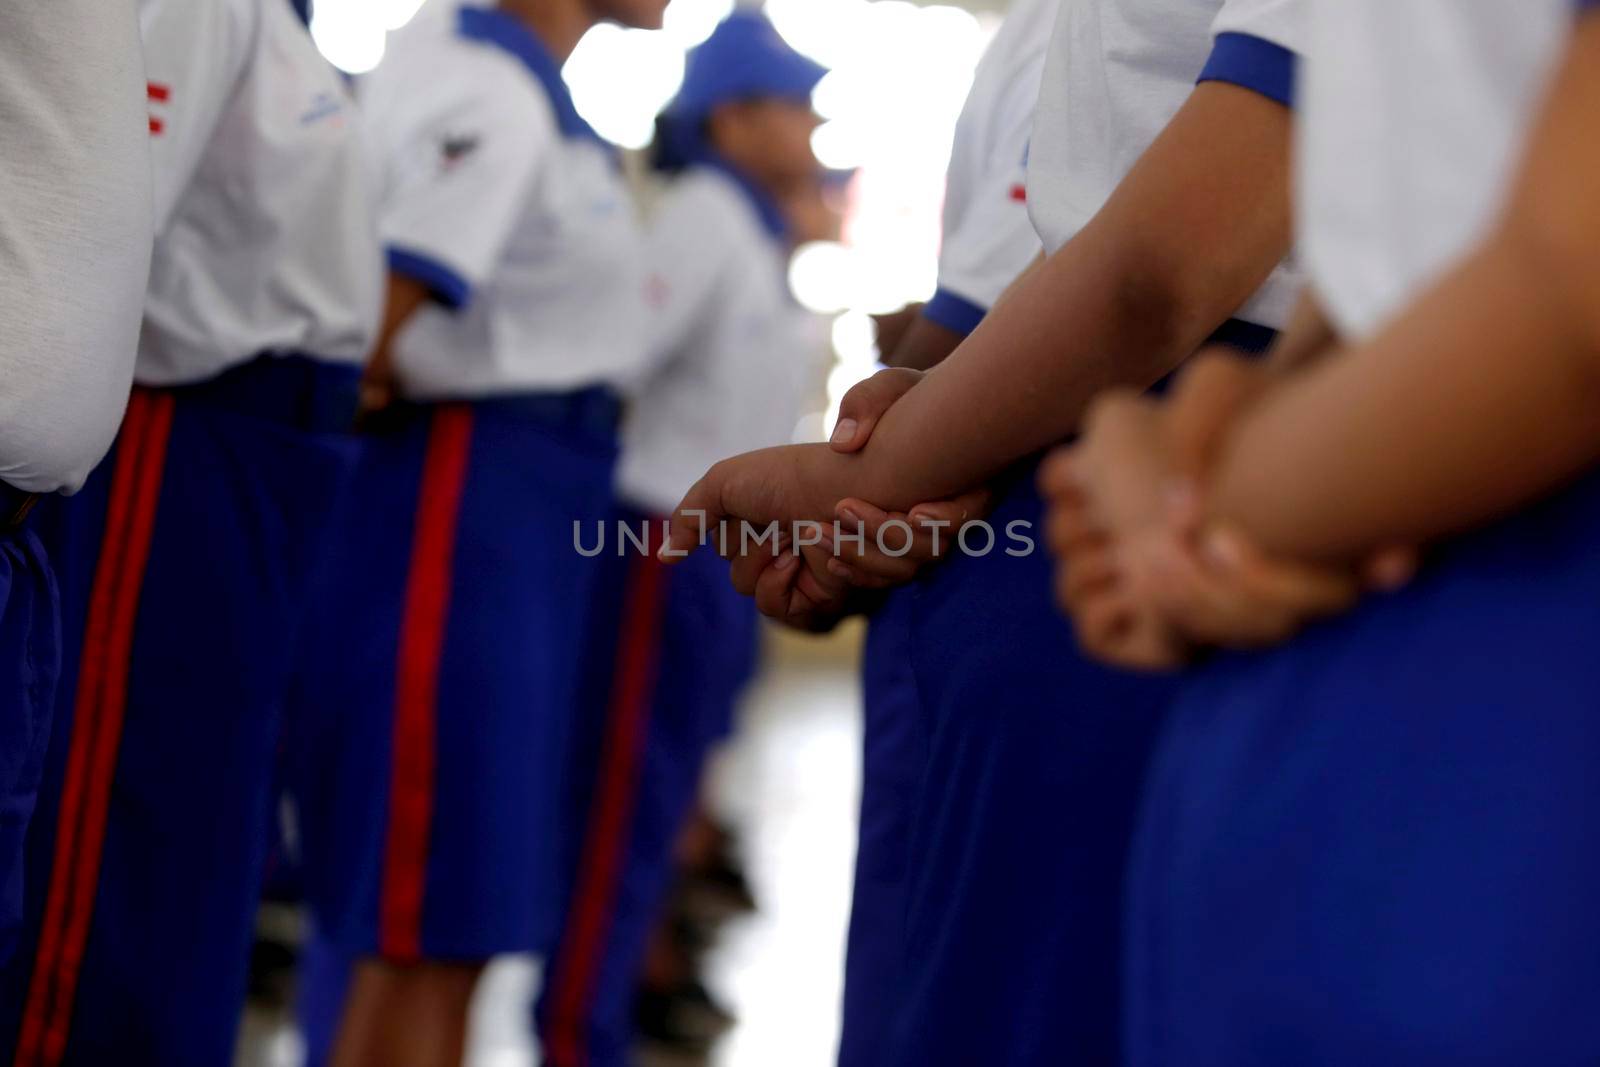 salvador, bahia / brazil - July 26, 2019: students from the municipal public school of altair da costa lima follow military rules during the educational process.


